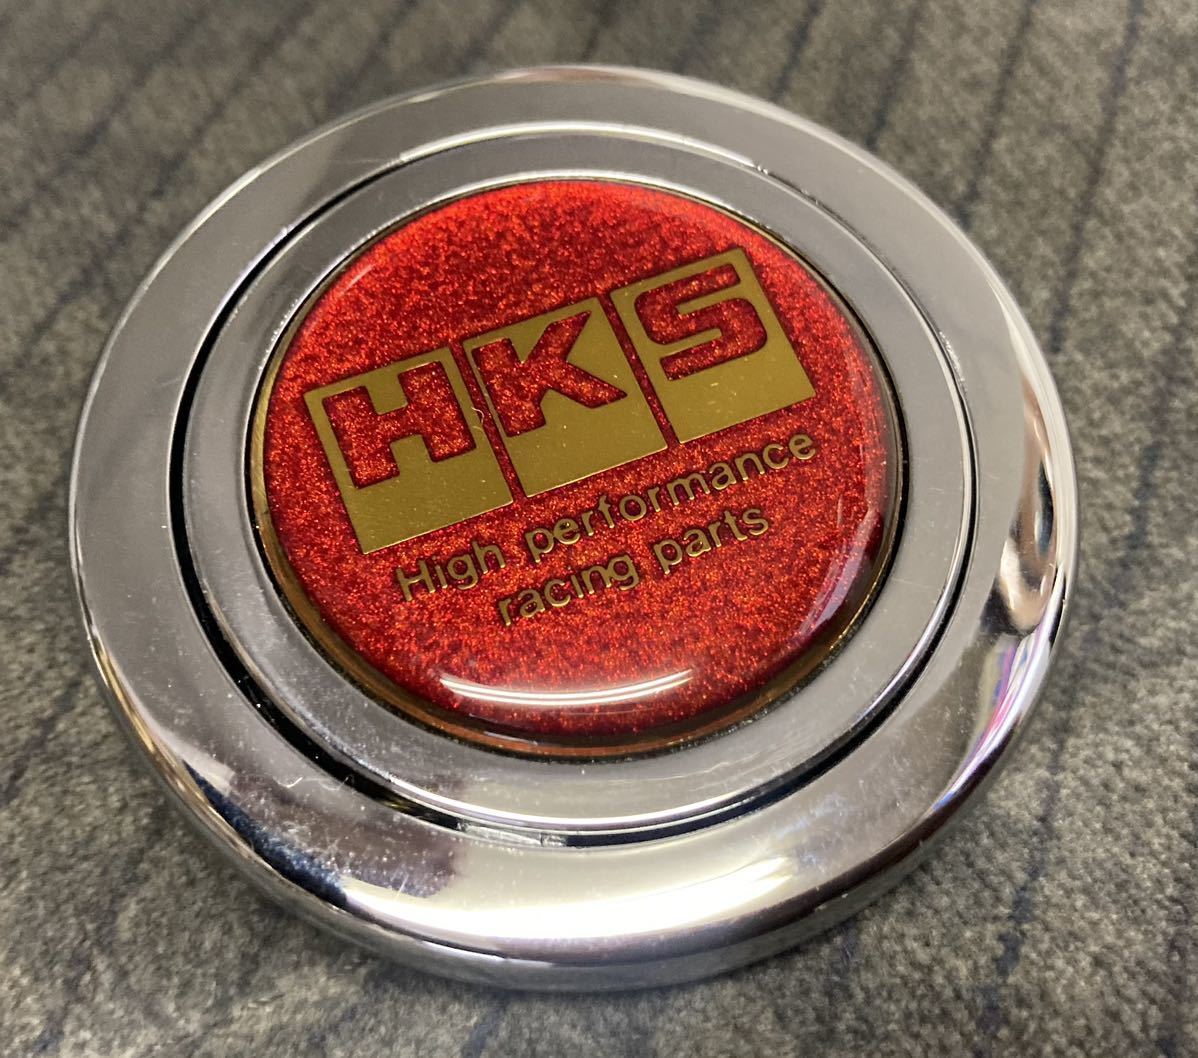 At That Time Hks Steering Horn Button Nissan Toyota Honda Old Car Road Racer Jdm